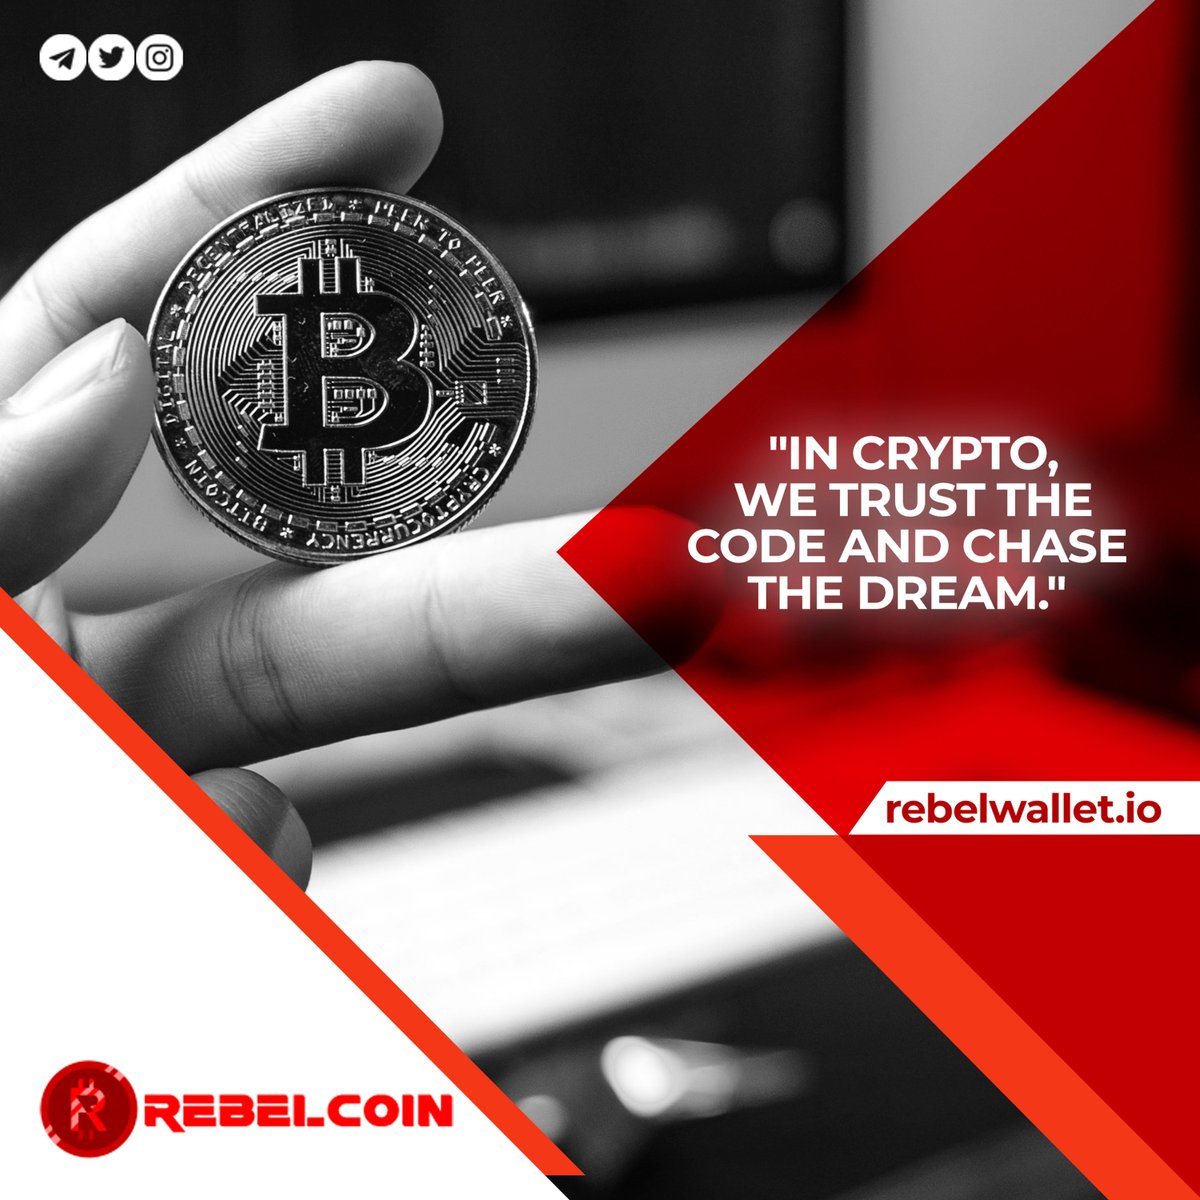 'In crypto, we trust the code and chase the dream.'
.
Follow us on 👉 @RealRebelCoin
.
#DeFi #DecentralizedFinance #SmartContracts #CryptoLending #CryptoBorrowing #CryptoStaking #YieldFarming #LiquidityMining #AutomatedMarketMaker #FlashLoans #CryptoAssets #CryptoExchanges